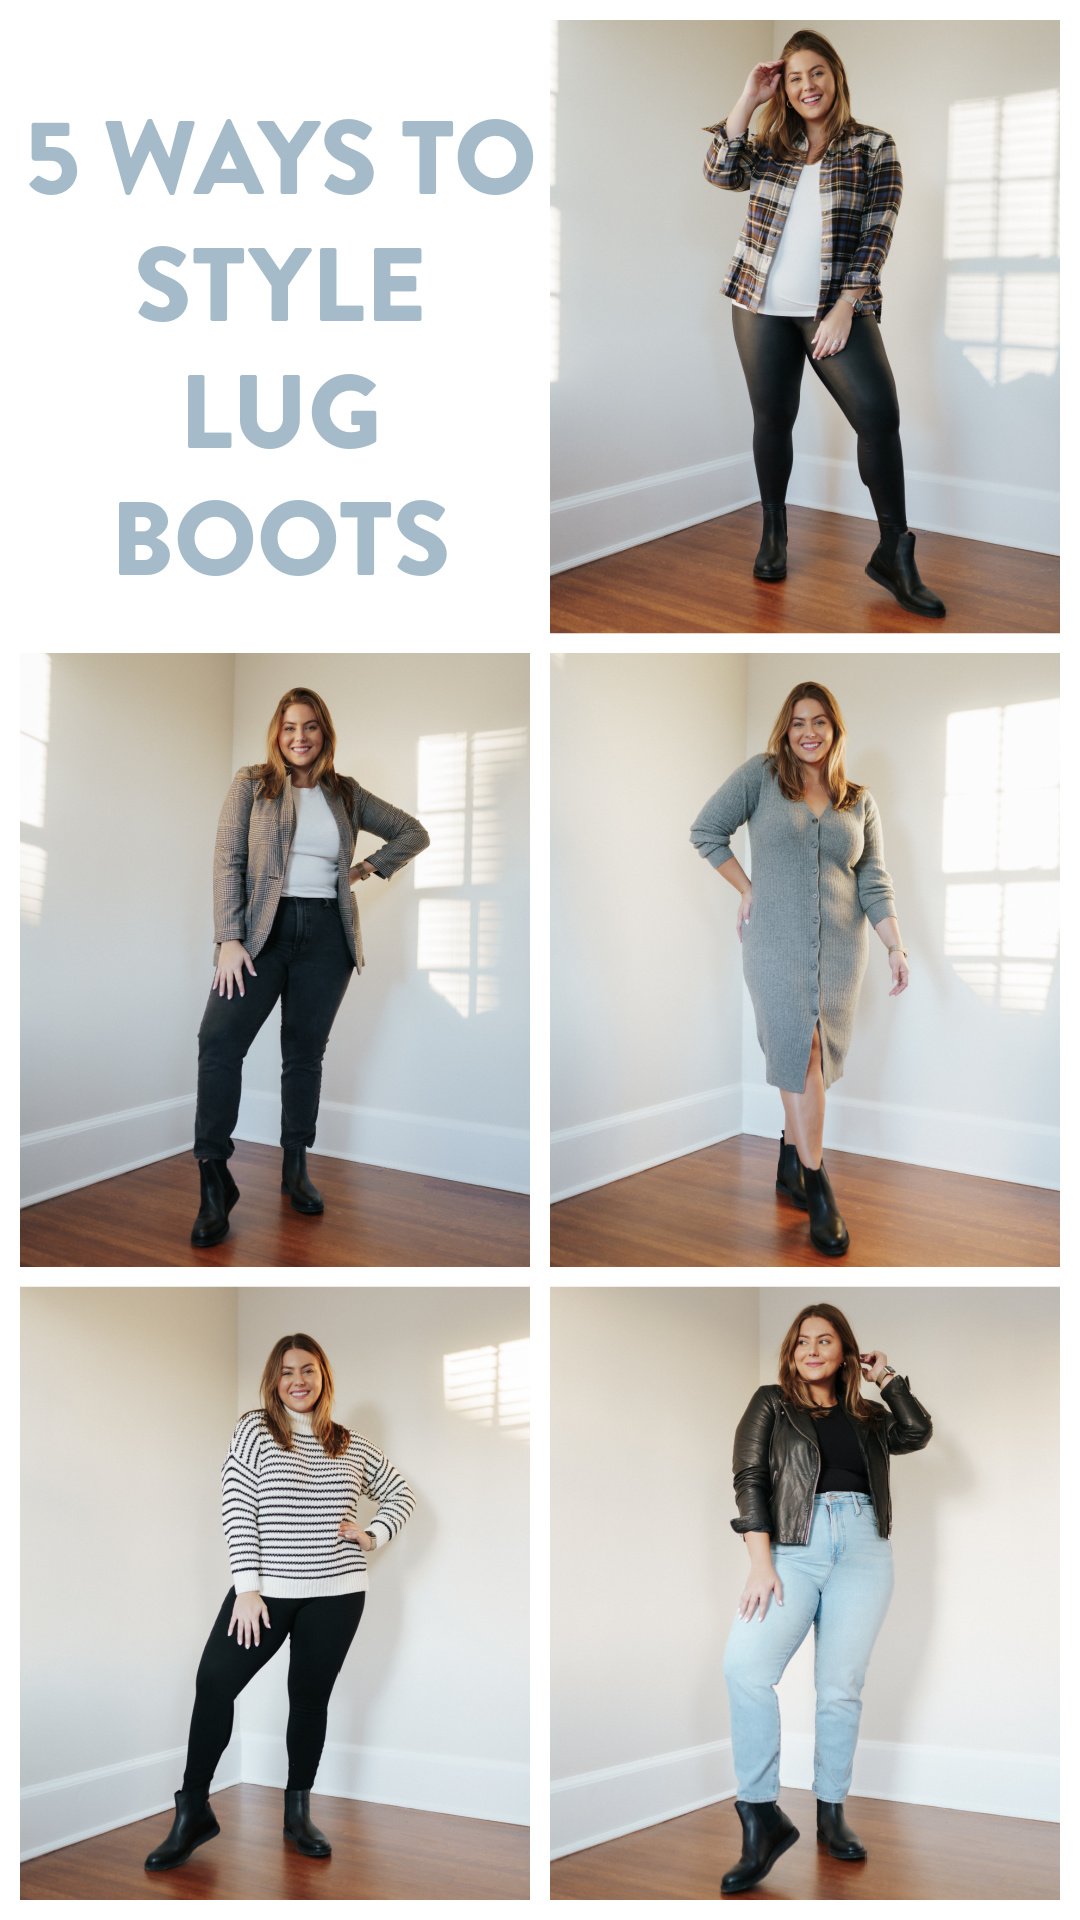 How To Style Lug Boots + More Fall Boot Picks — Caralyn Mirand Koch